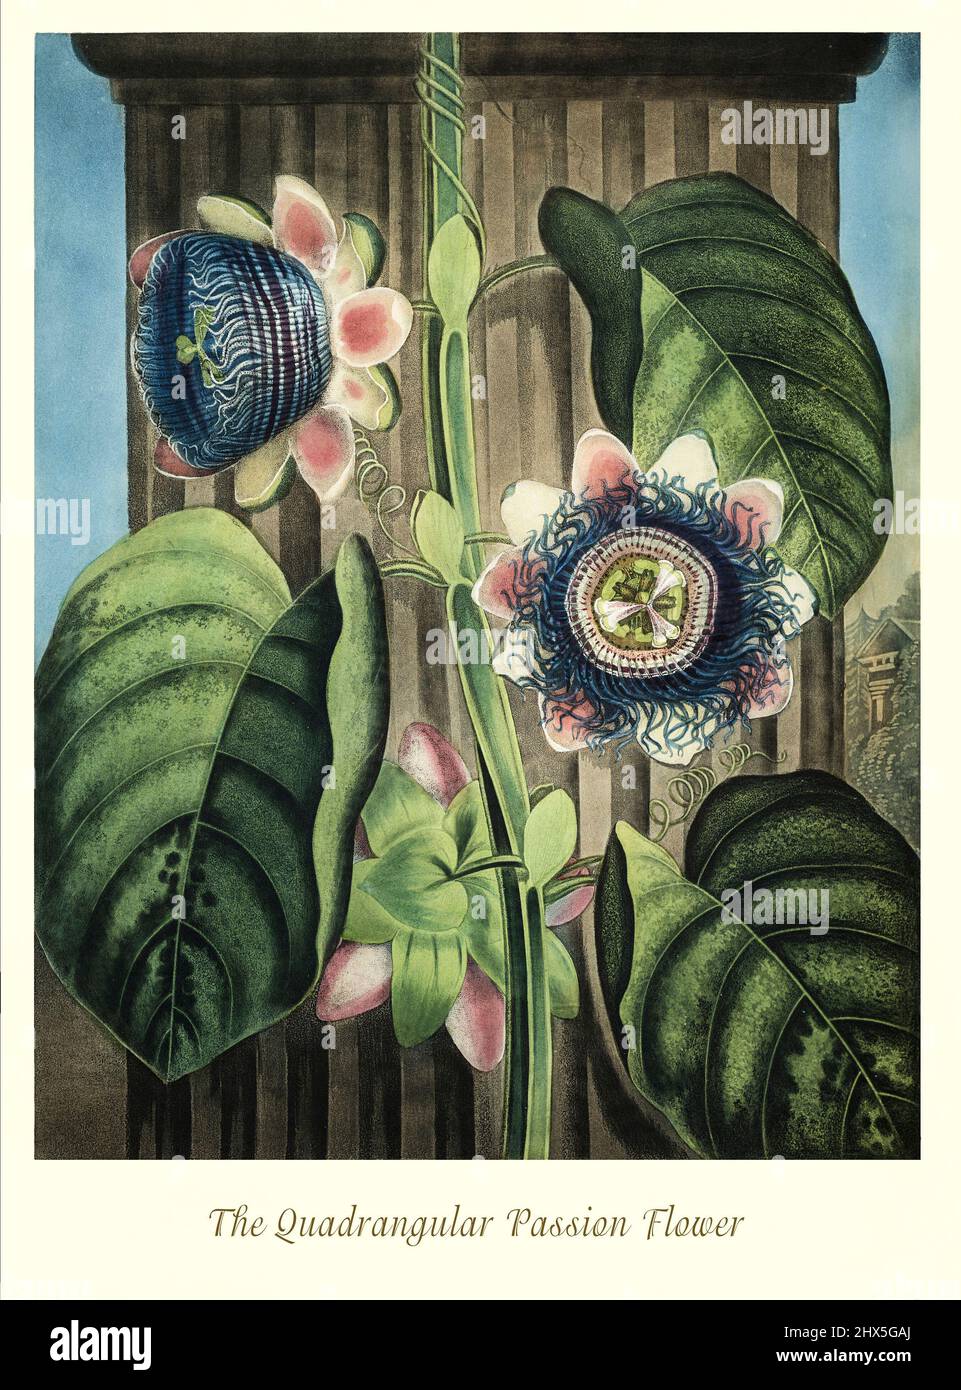 An early 19th century illustration of the Quadrangular Passion Flower in the Genus Passiflora and Family Passifloraceae, a genus of about 550 species of flowering plants, mostly tendril-bearing vines, with some being shrubs or trees. They can be woody or herbaceous. Passion flowers produce regular and usually showy flowers with a distinctive corona. The flower is pentamerous and ripens into an indehiscent fruit with numerous seeds. This artwork for Robert John Thornton's 'The Temple of Flora' in 1807, was printed, for the publisher, by T. Bensley, London, England. Stock Photo